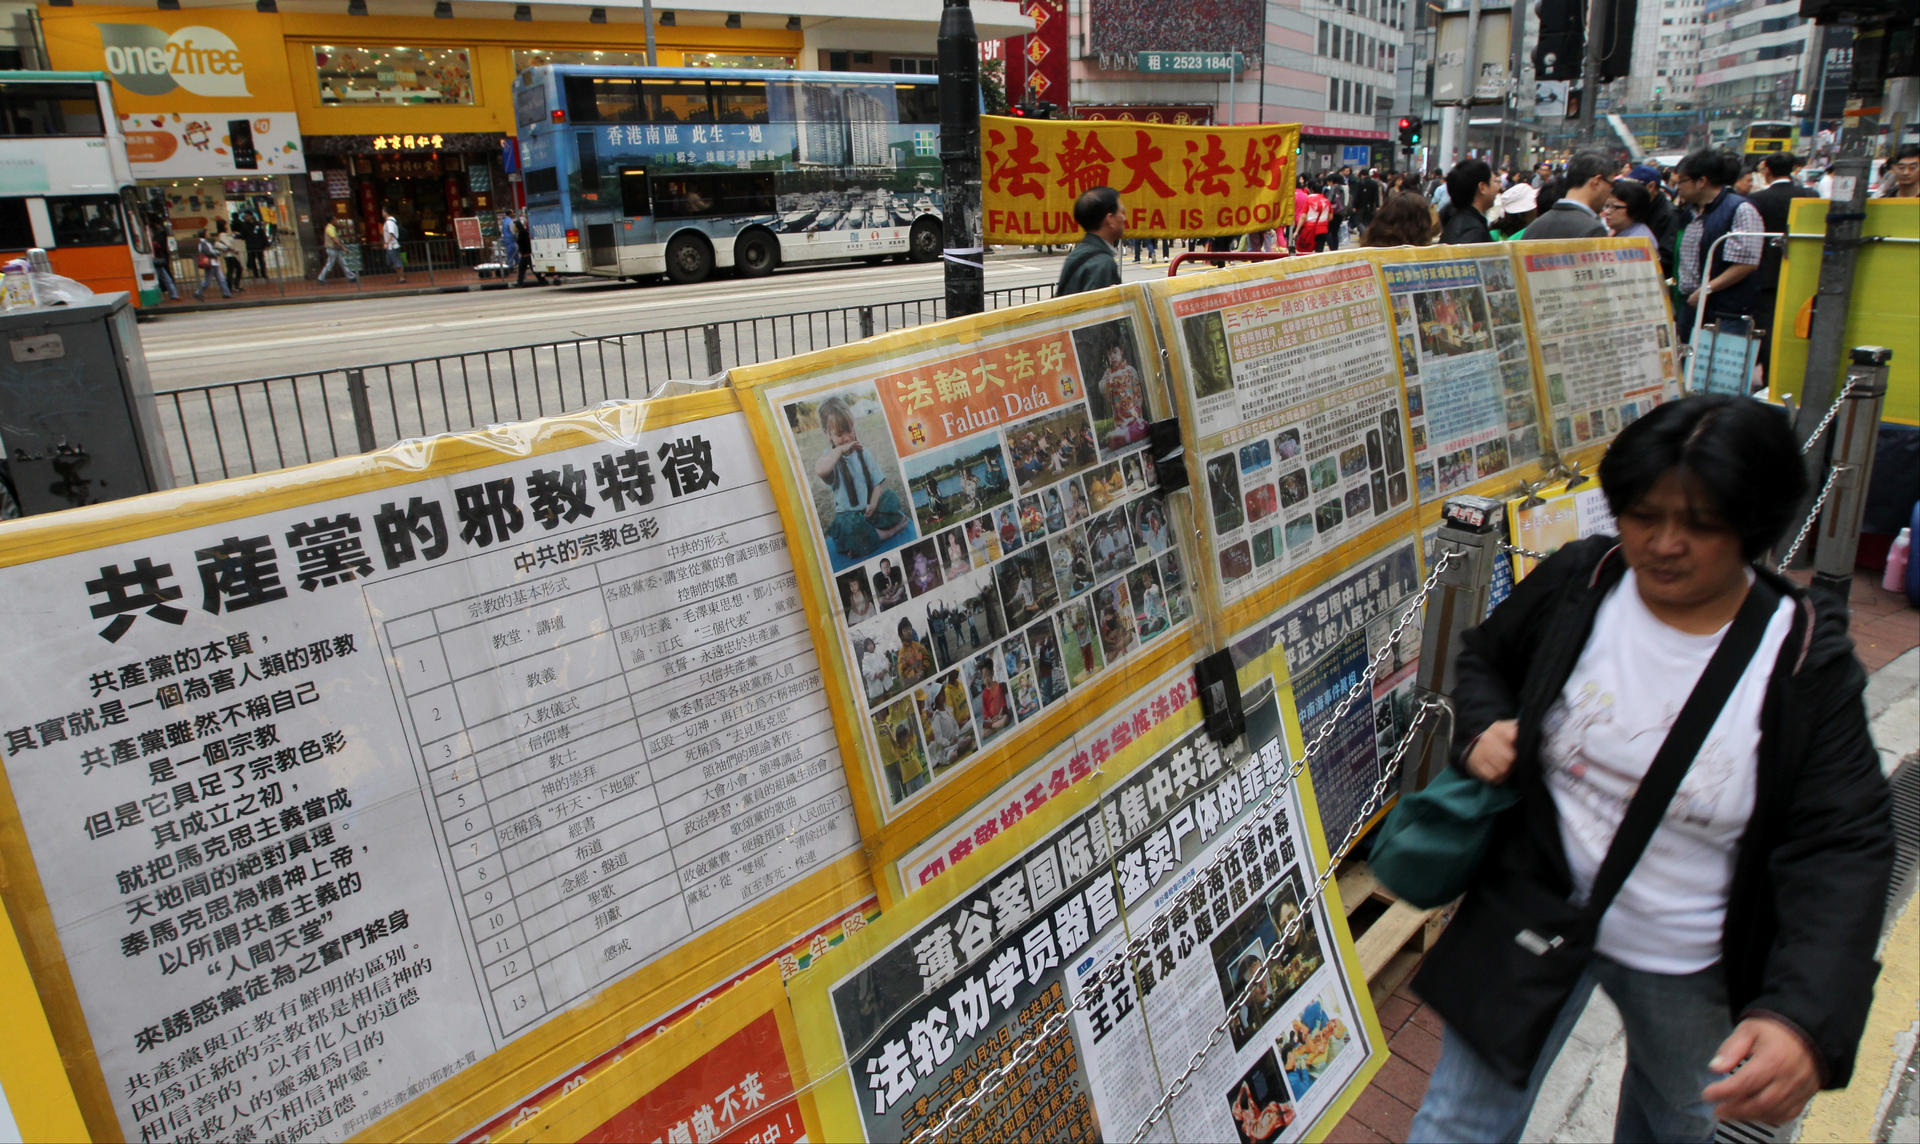 Banners promoting Falun Gong and defending its followers have reappeared at the junction of Yee Wo Street and Great George Street in Causeway Bay. Photo: Felix Wong